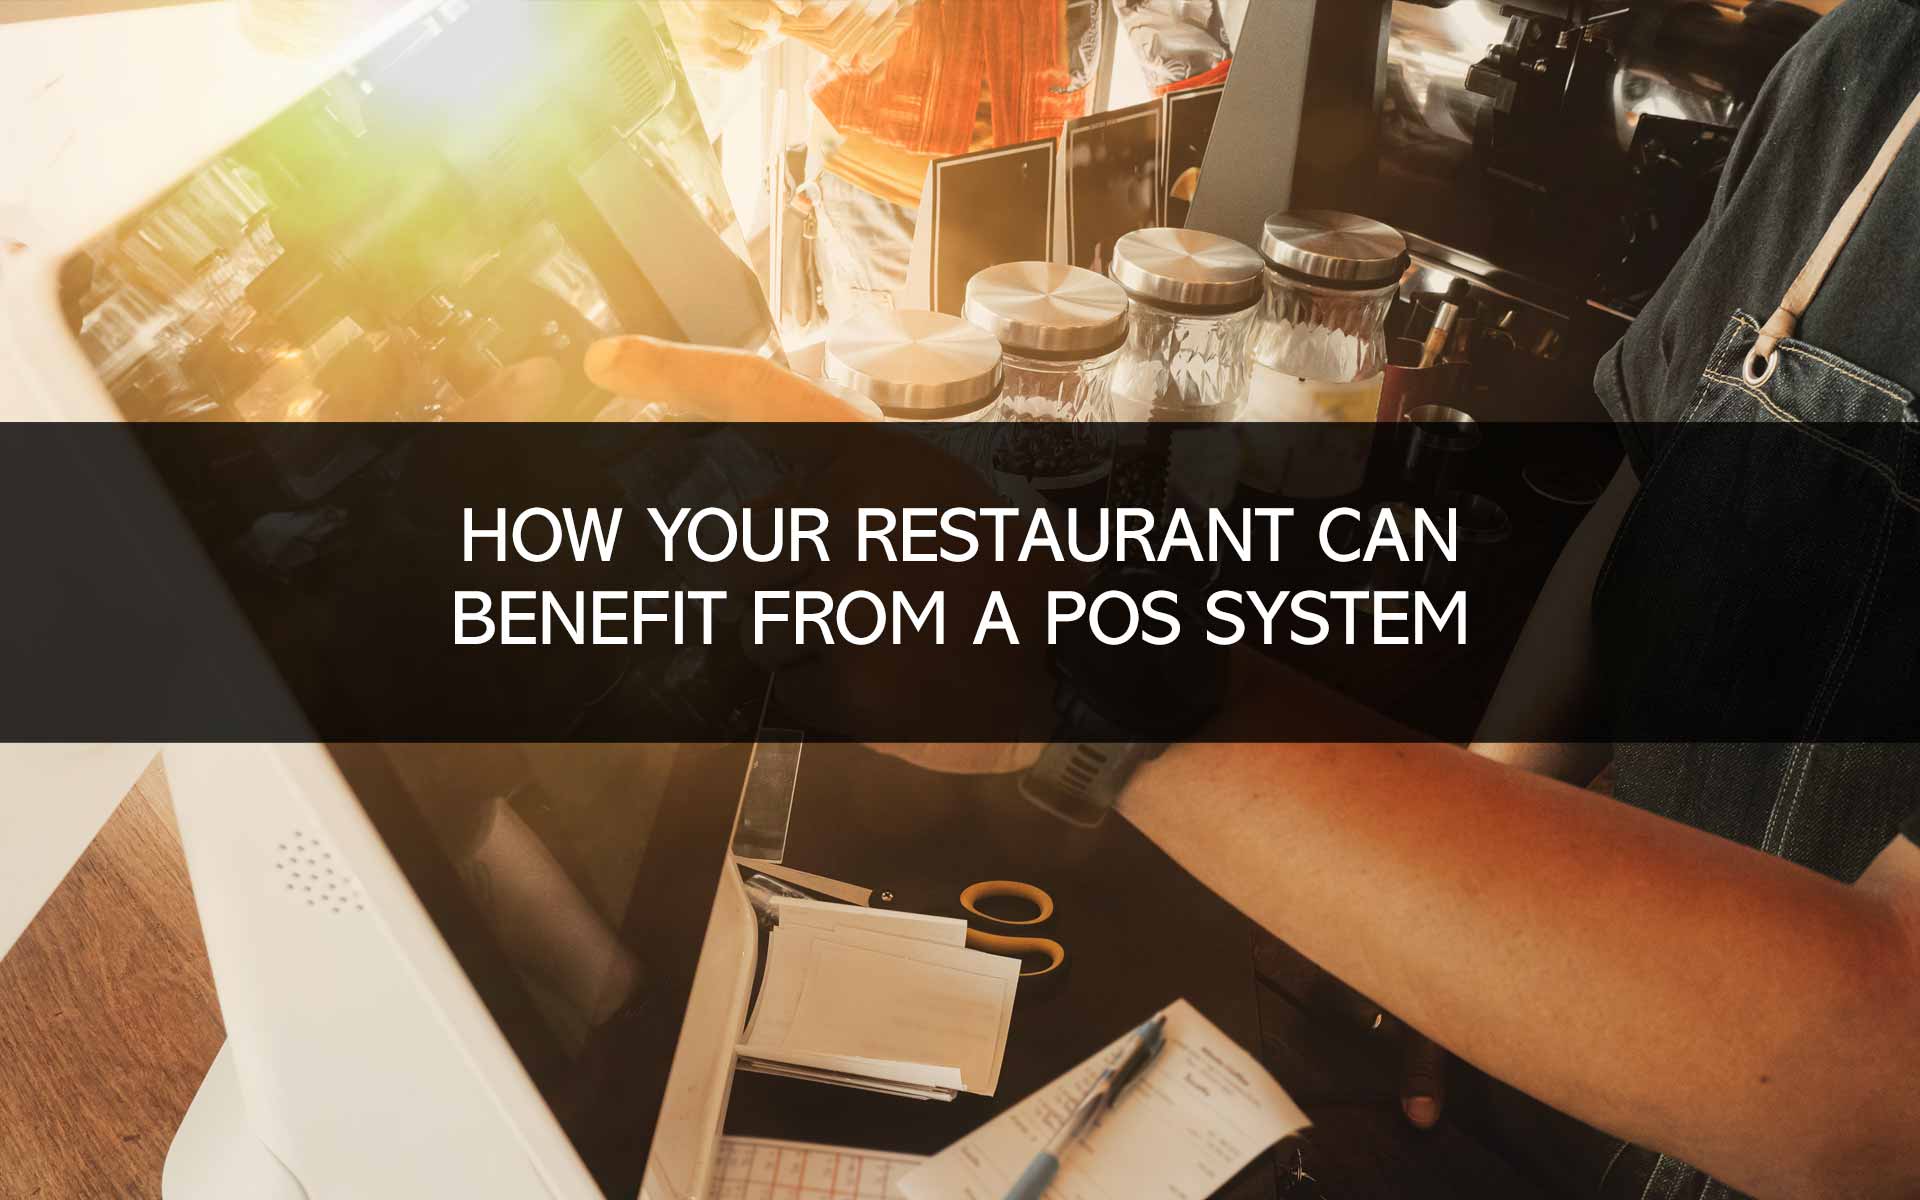 How Your Restaurant Can Benefit from a POS System